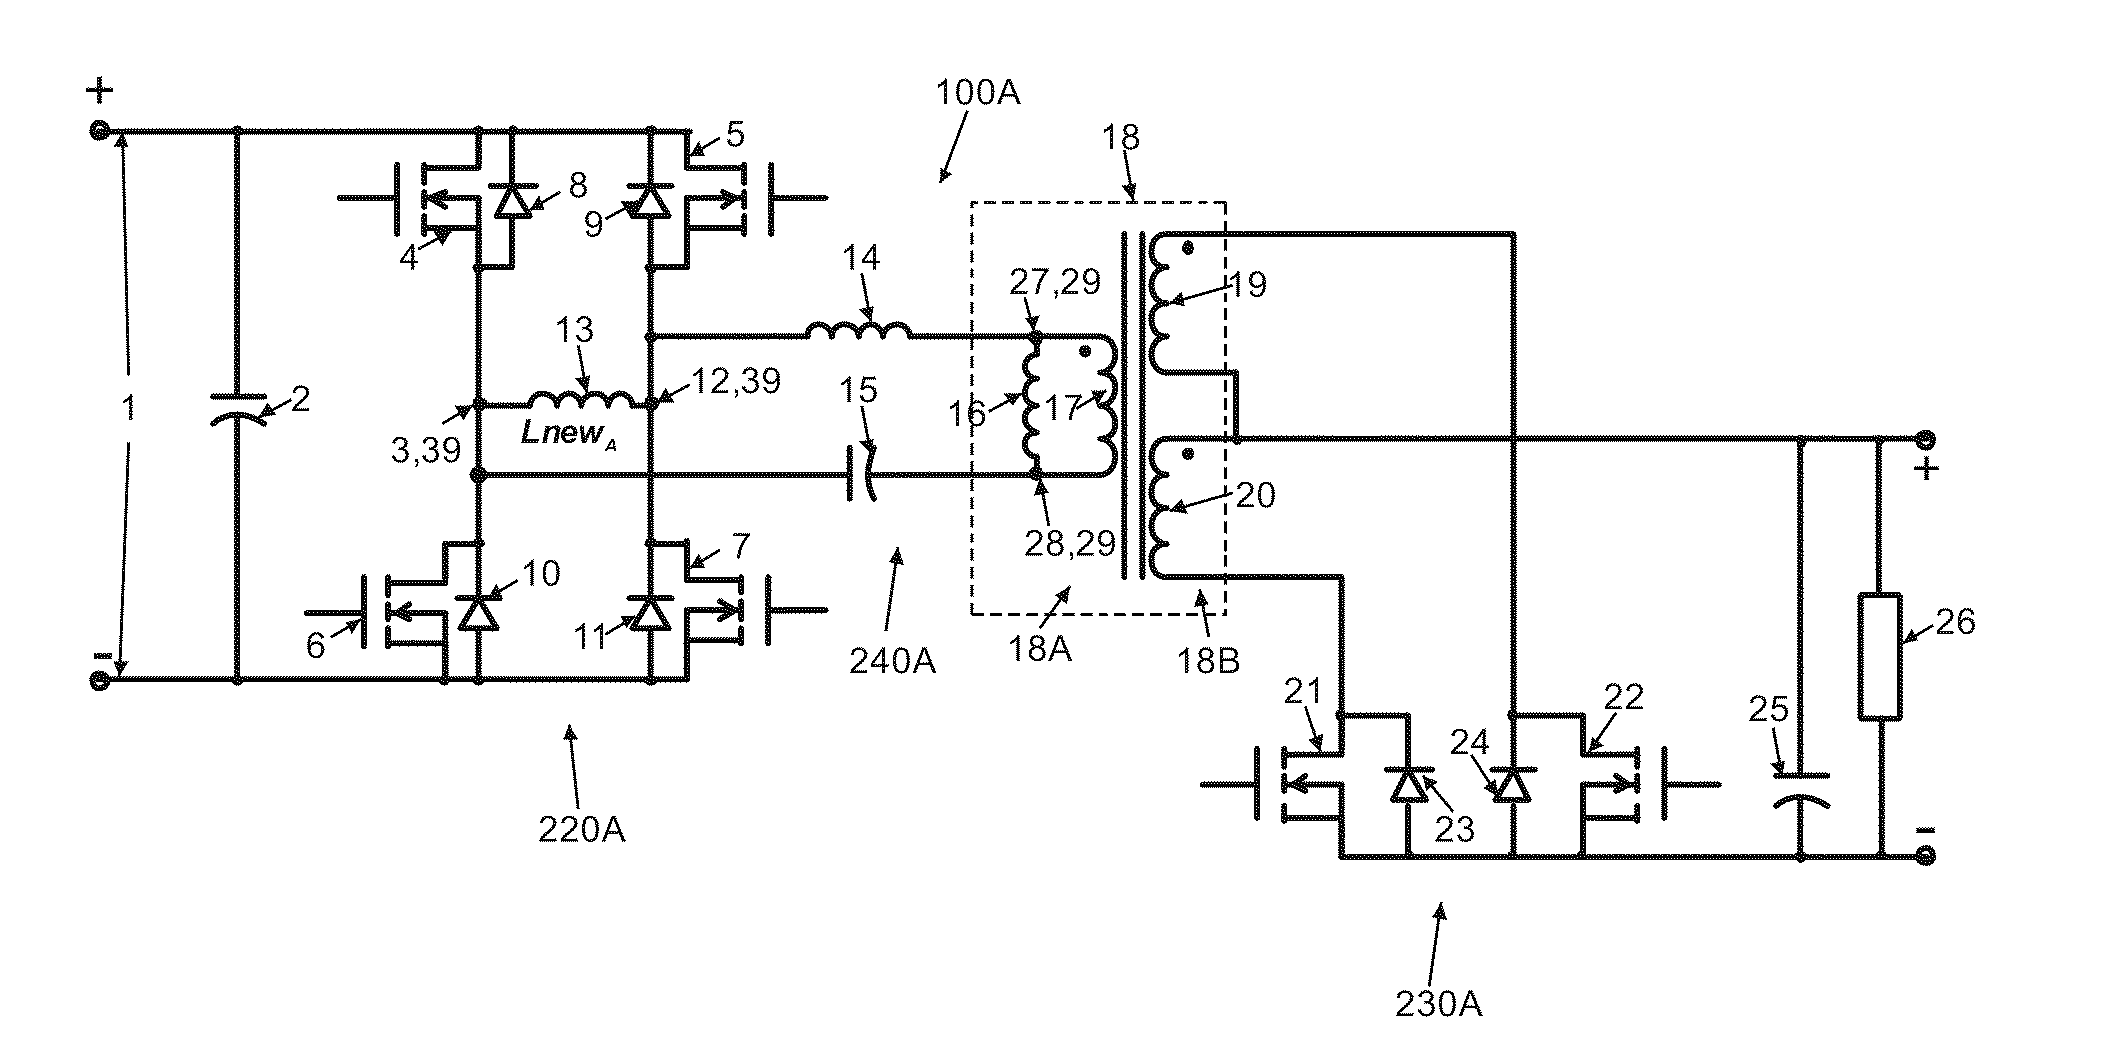 Bi-directional power converter with regulated output and soft switching